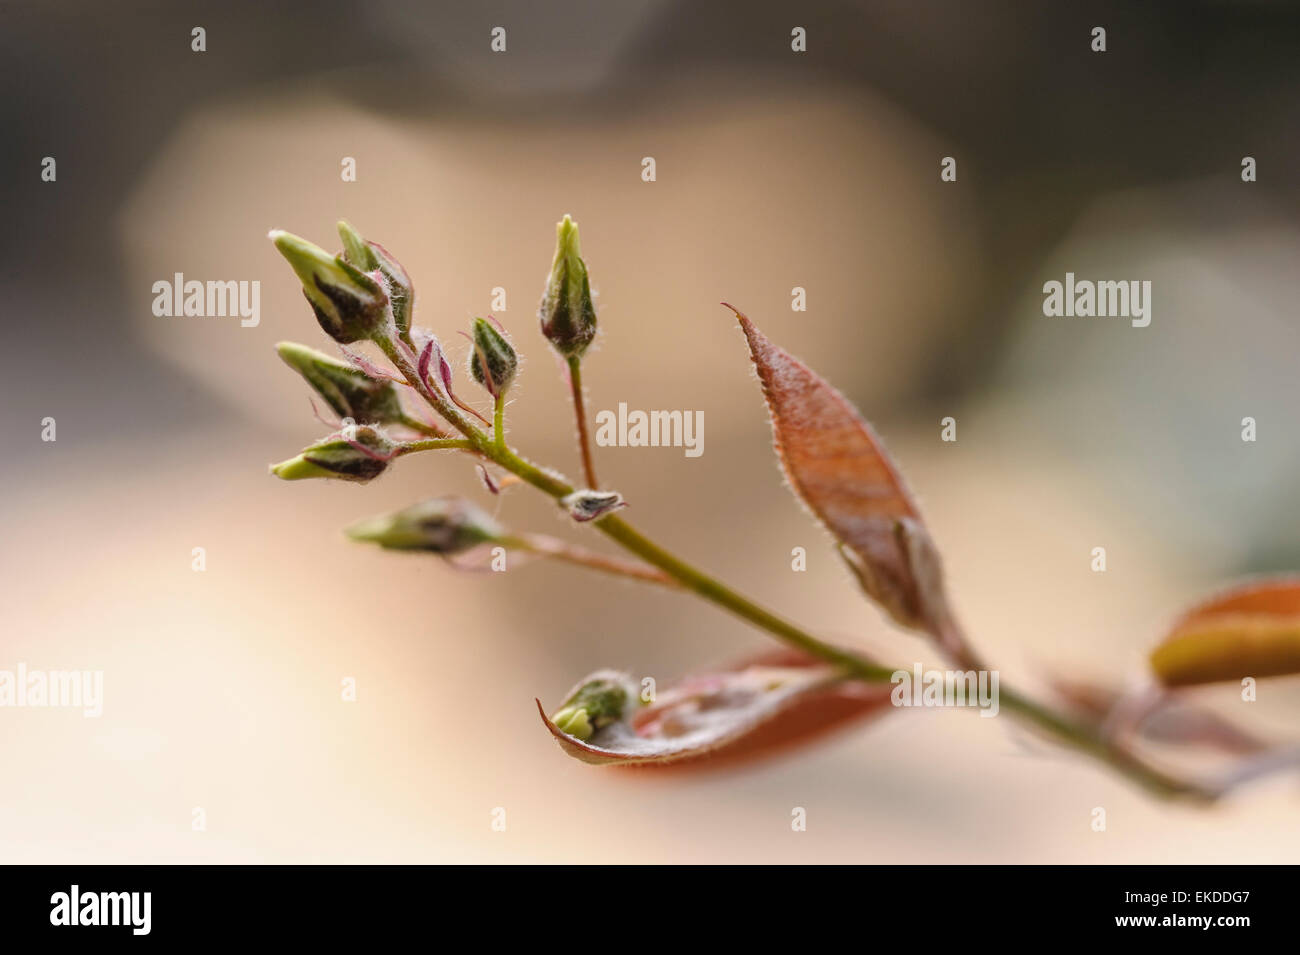 Amelanchier canadensis, with fresh leaves and flower buds. Stock Photo